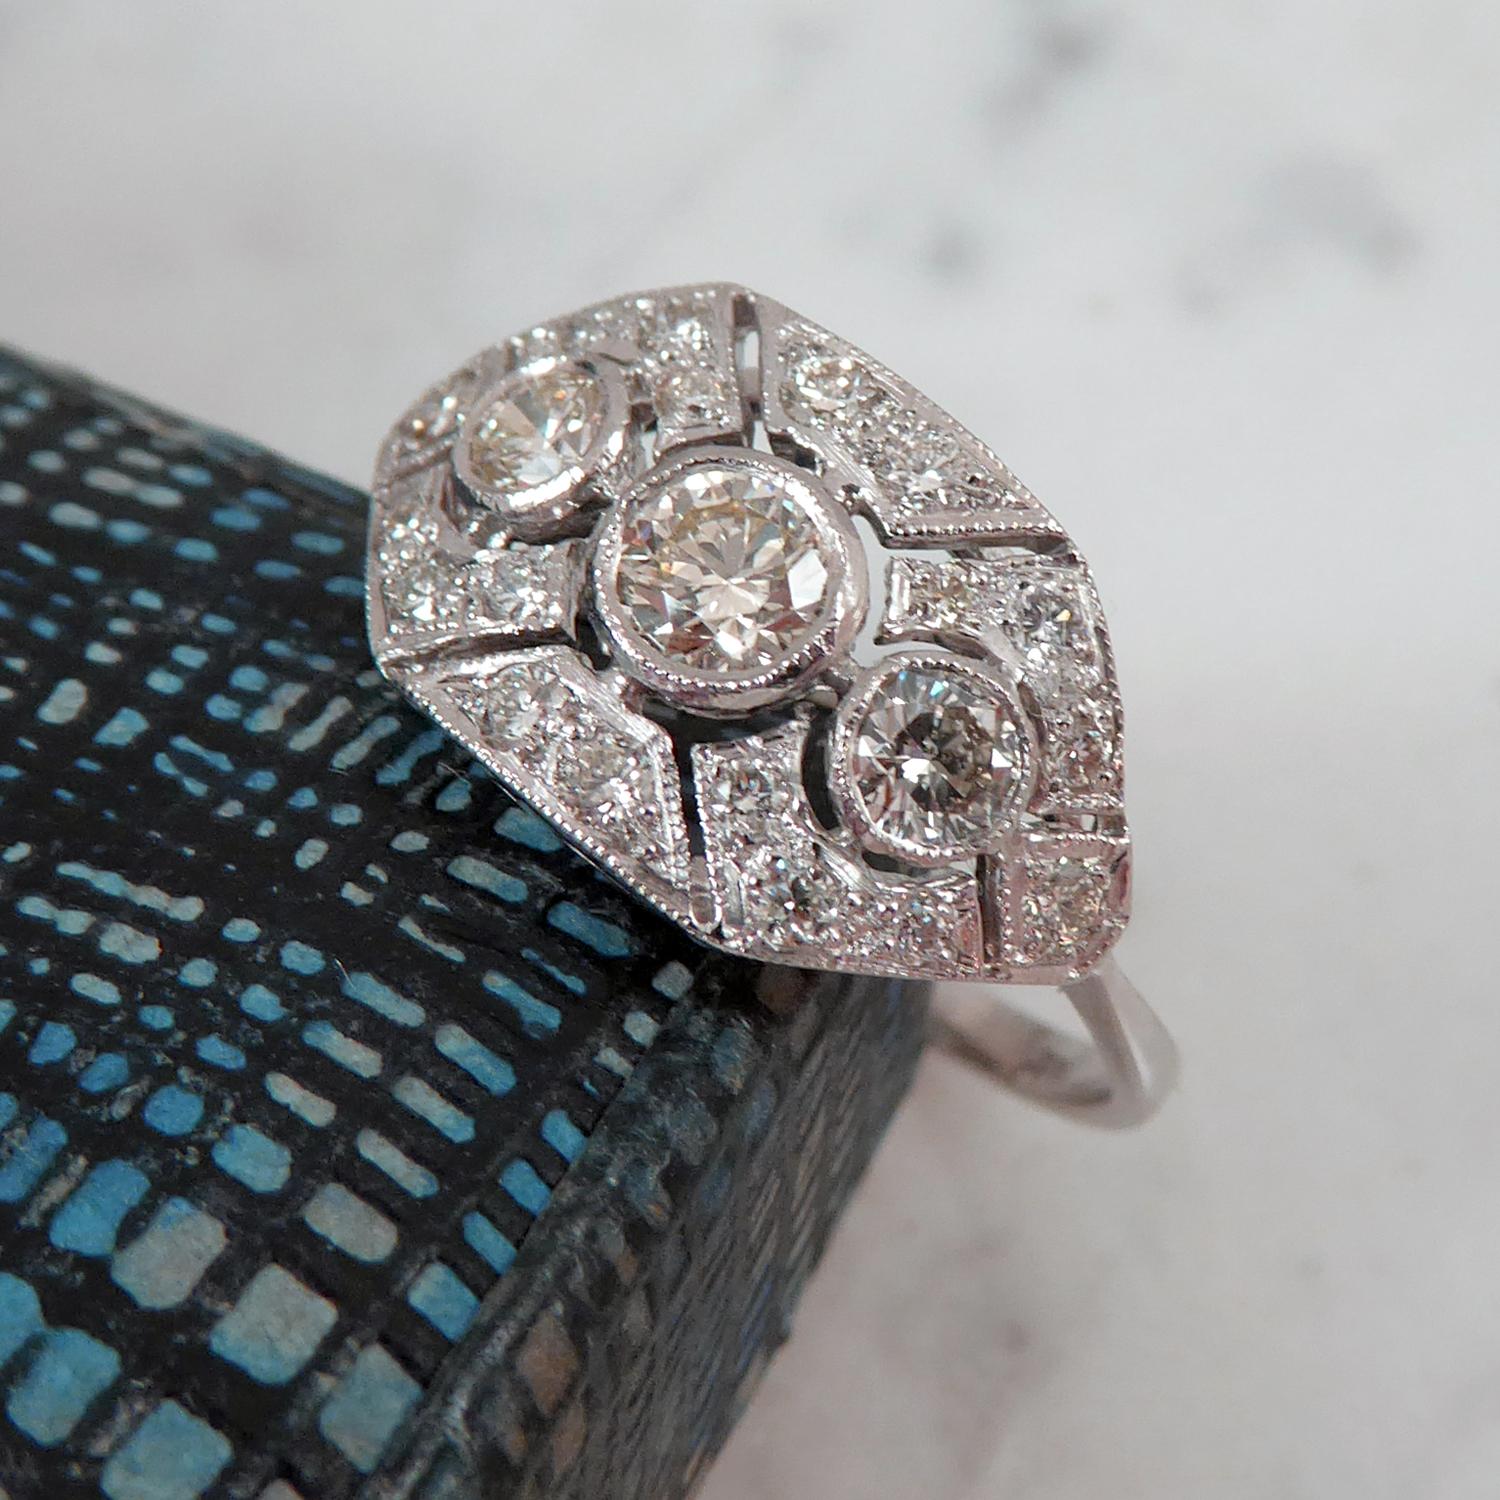 A mid-20th century diamond set dress ring consisting of three centrally set, fully rub over set, round brilliant cut diamonds. The diamonds are inset against a hexagonal-shaped white surround, grain set with a total of 18 round brilliant cut